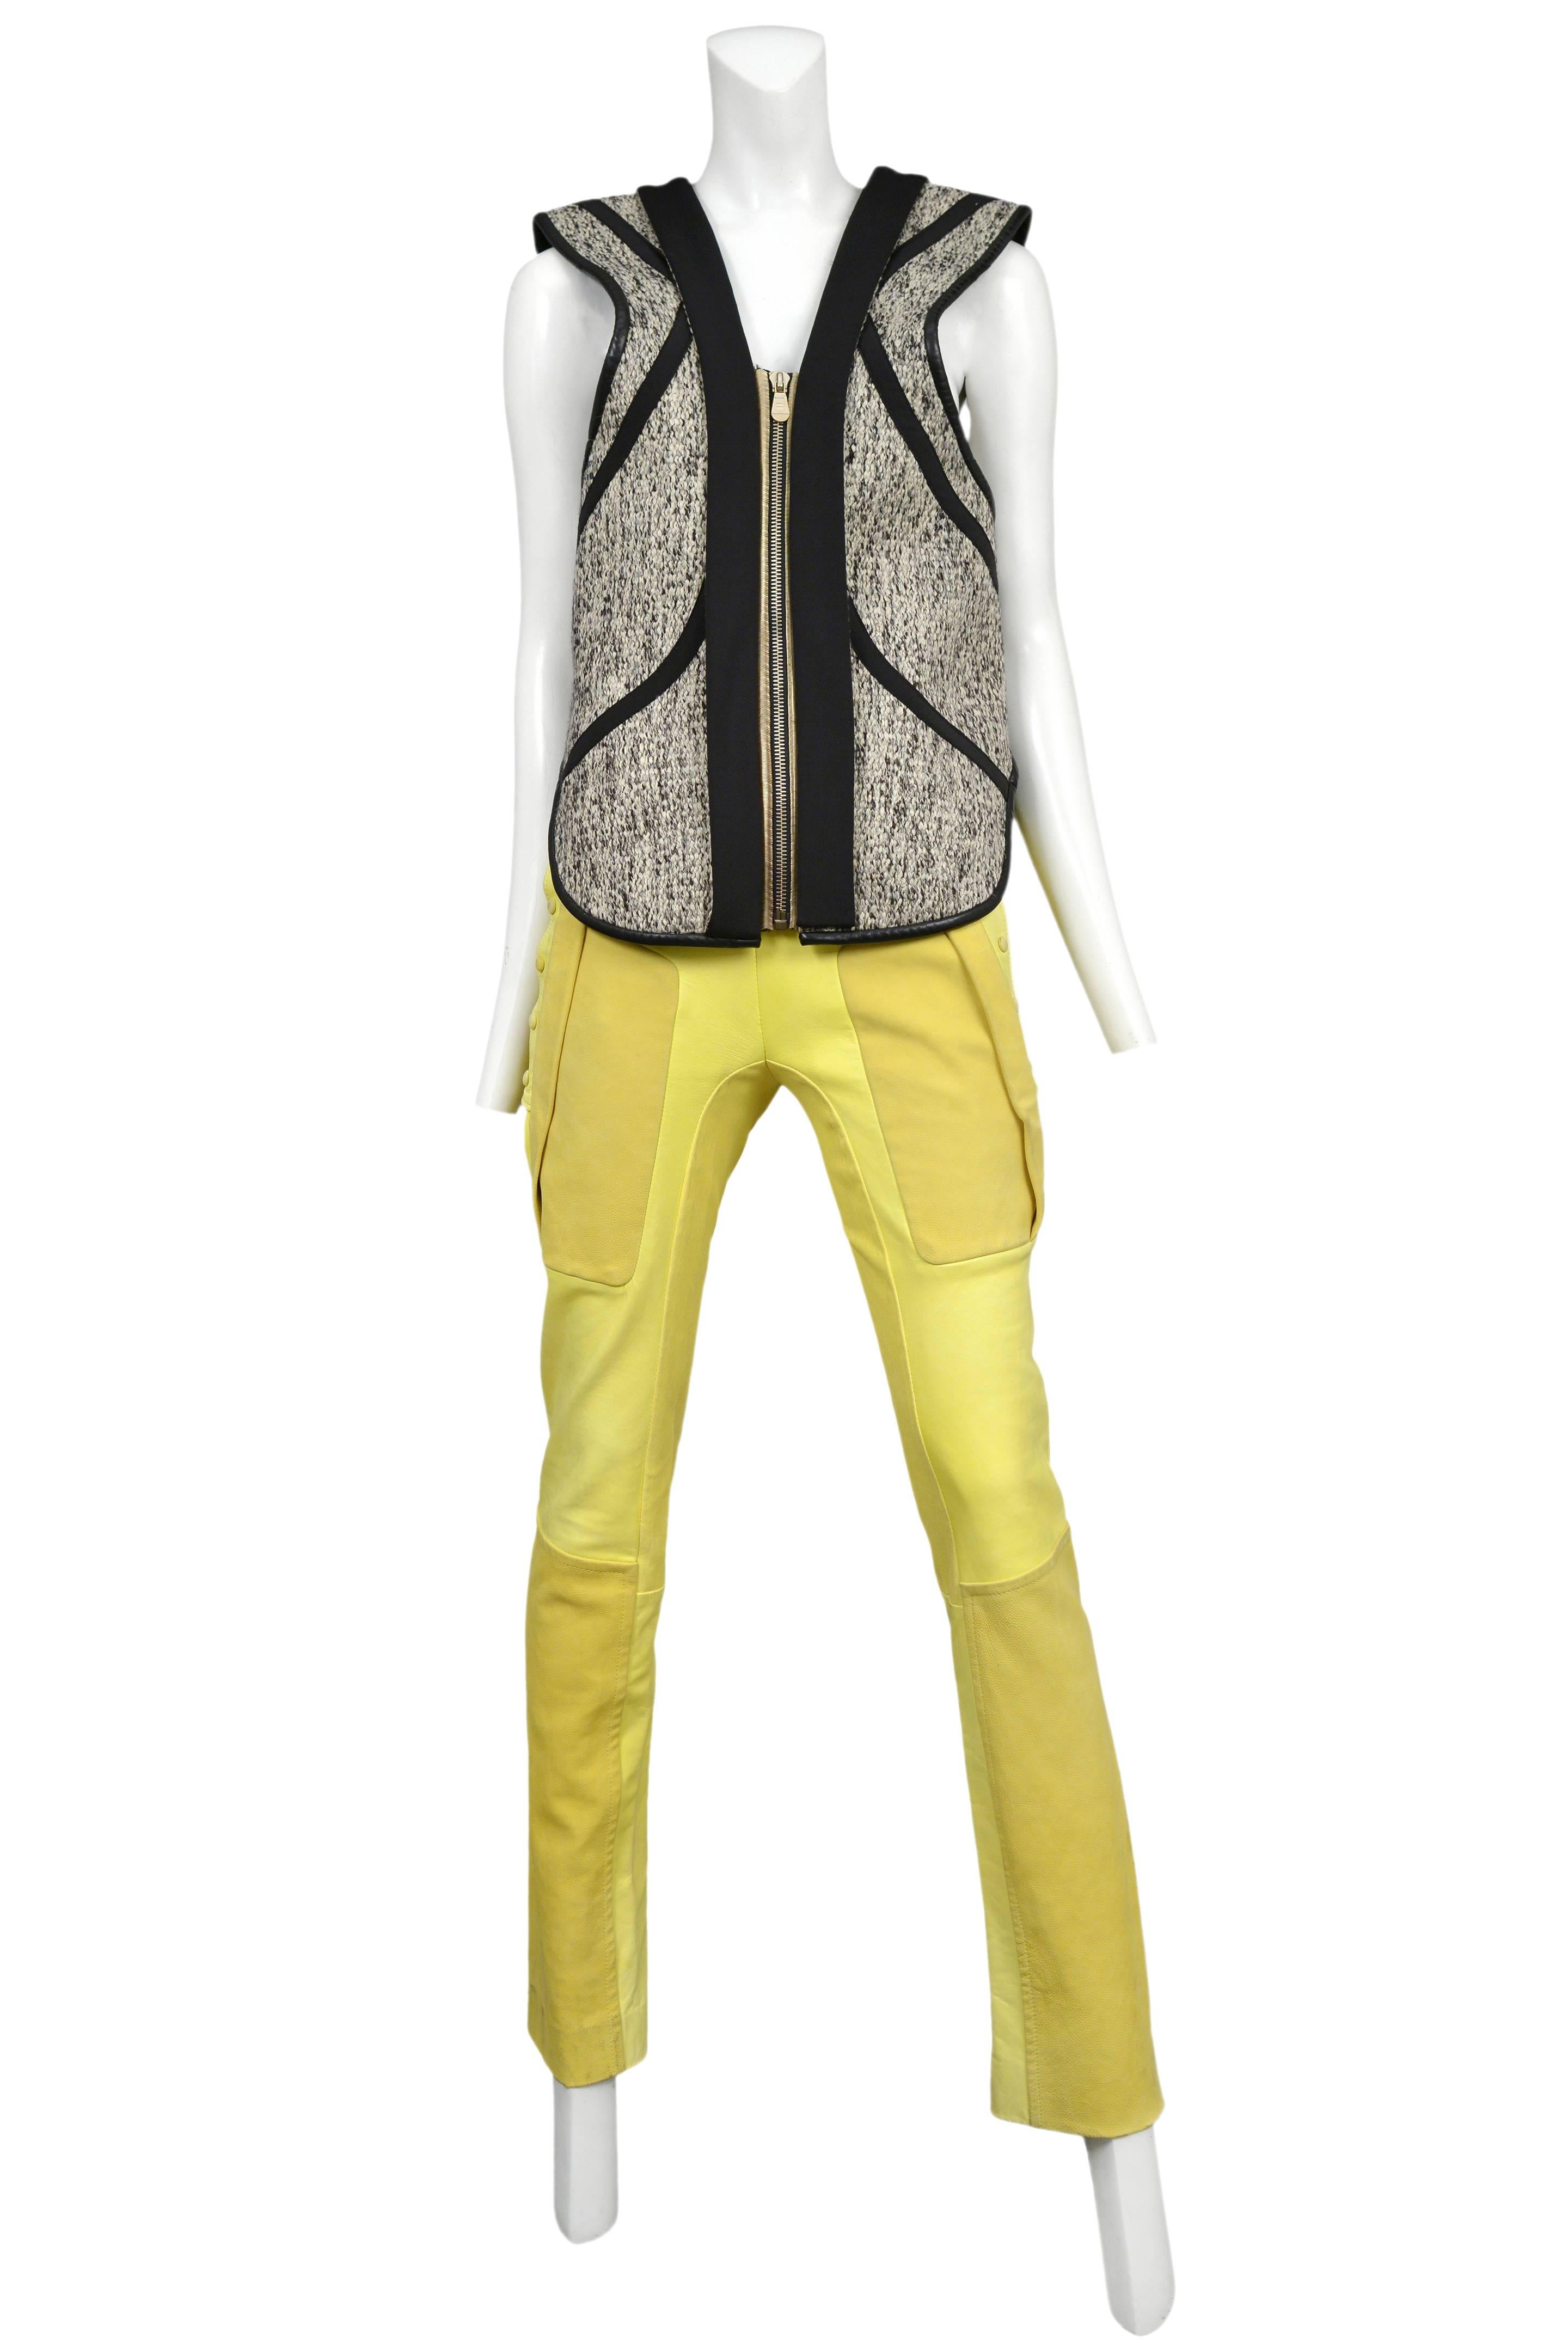 Vintage Nicolas Ghesquière for Balenciaga ensemble featuring an abstract wool zipper front vest and yellow leather moto pants with snap detailing up the sides. Runway ensemble from the Spring / Summer 2010 Collection.
Please inquire for additional